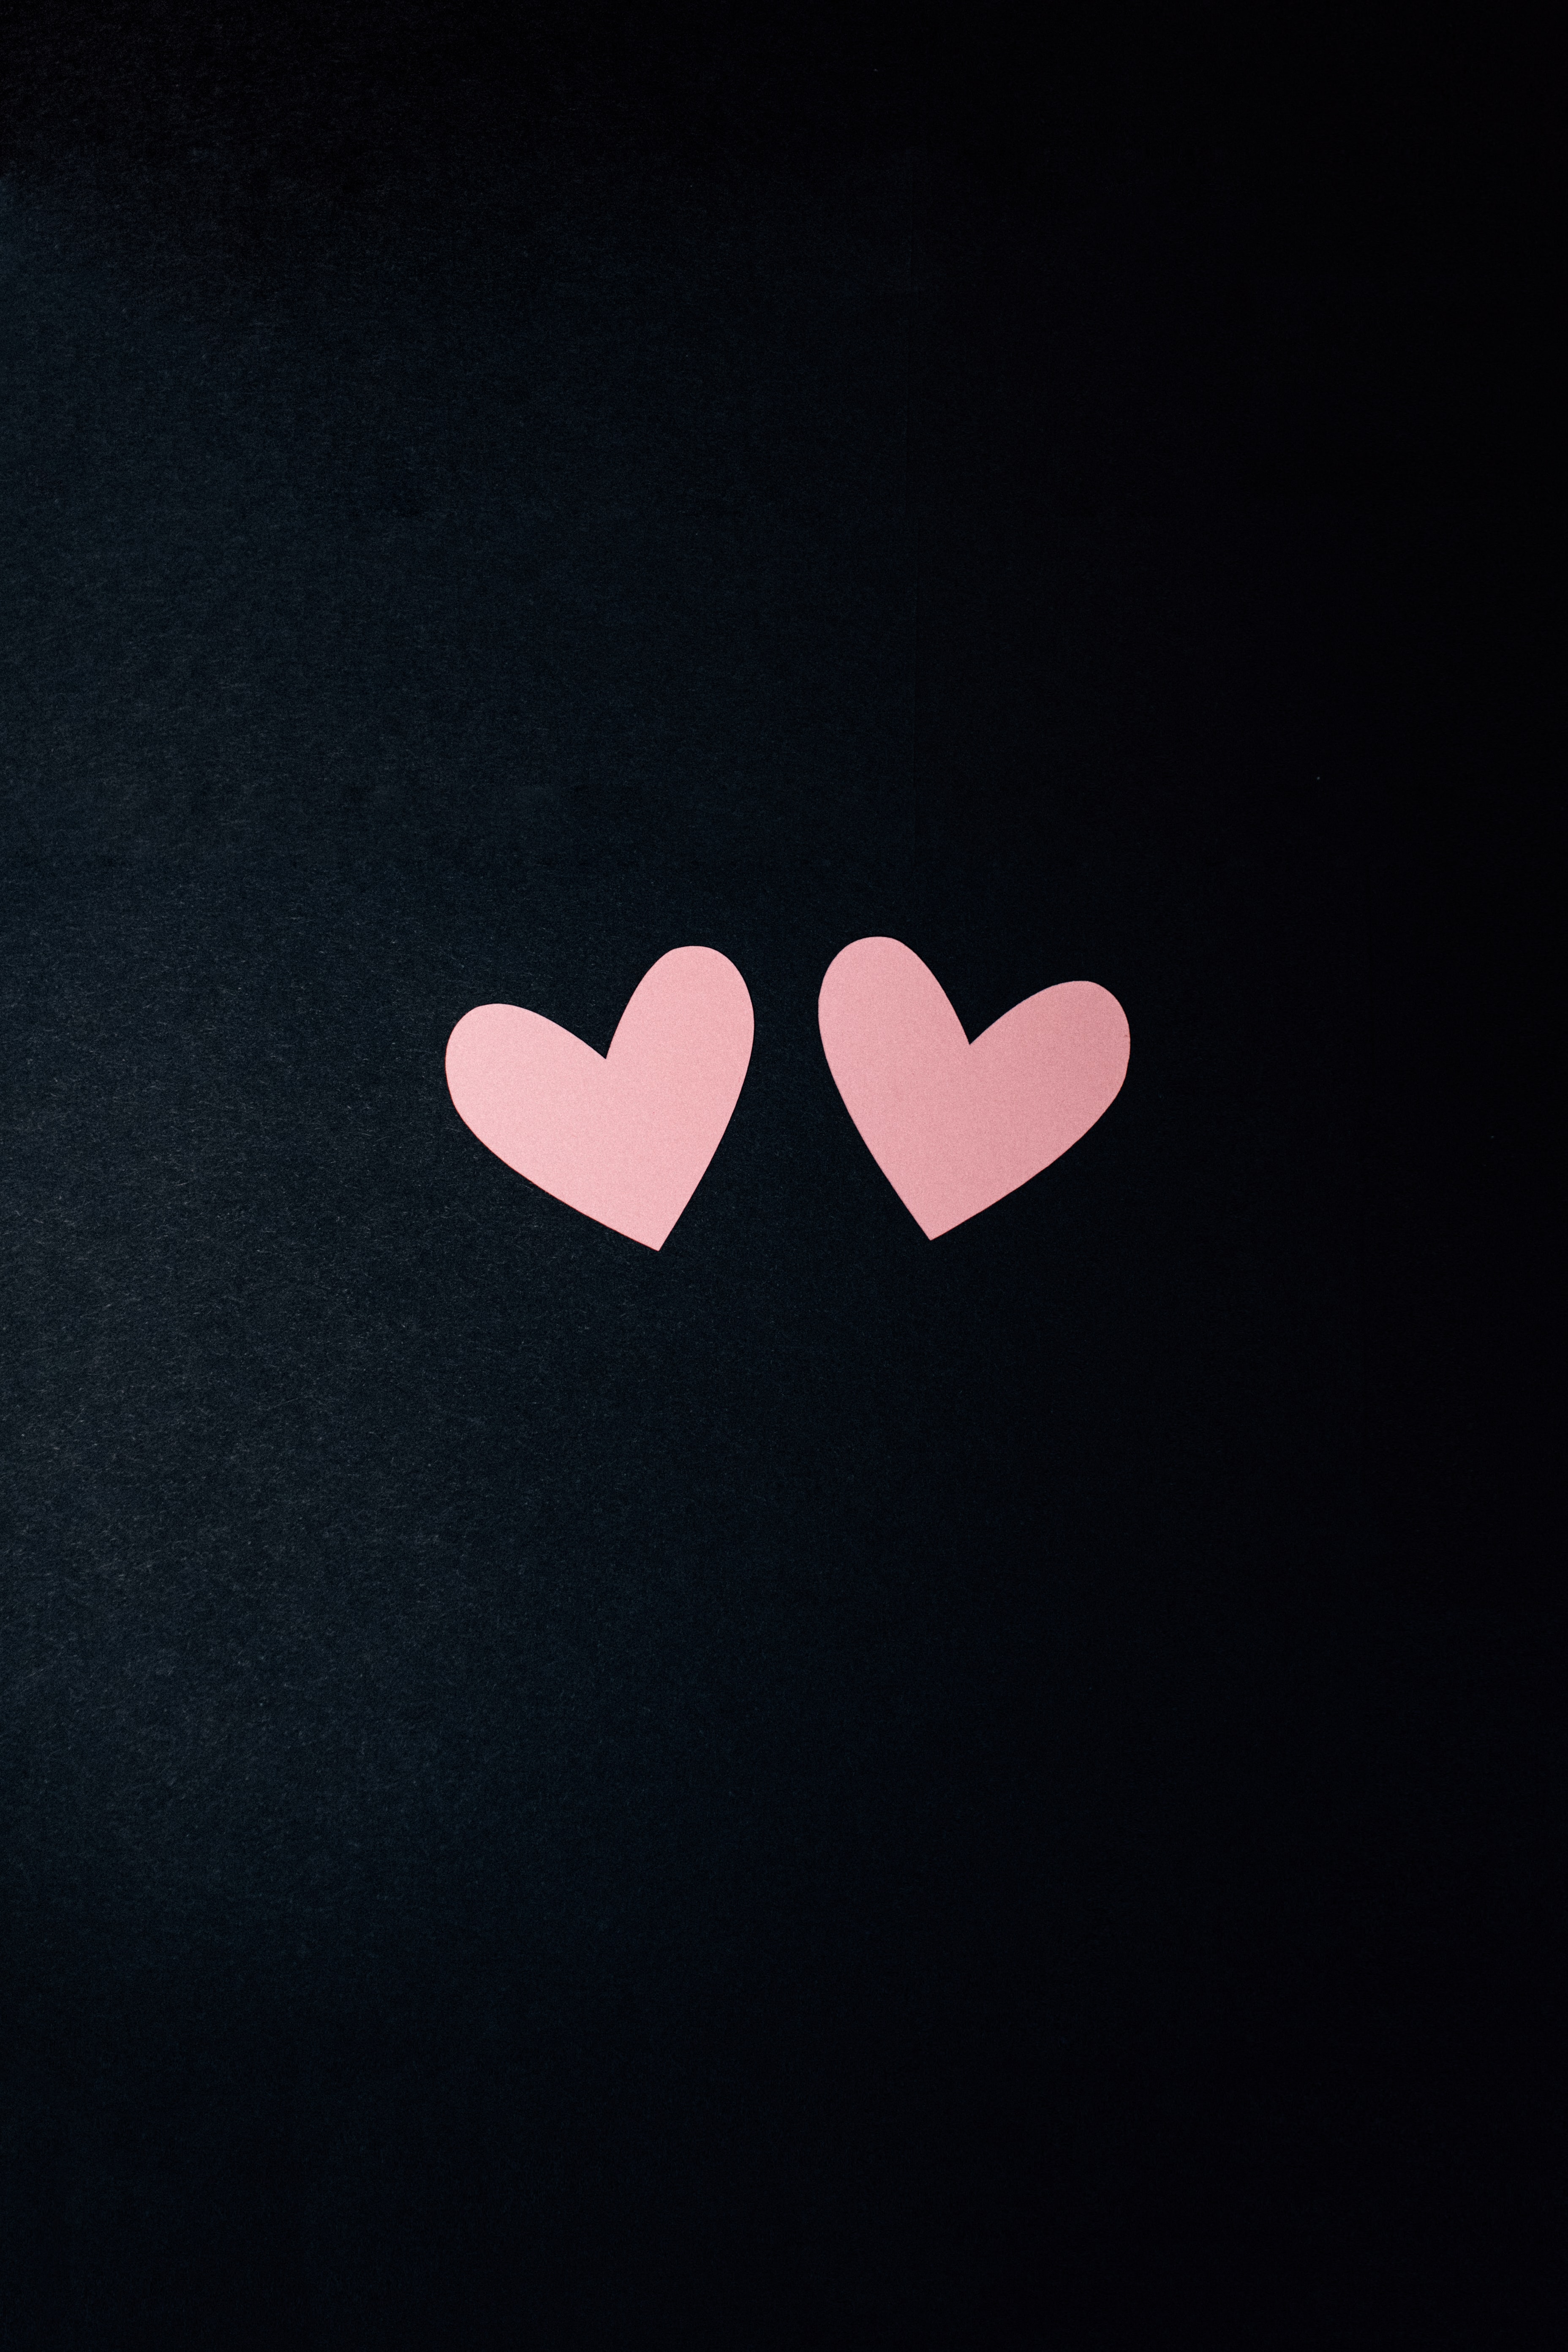 Best Hearts Background for mobile